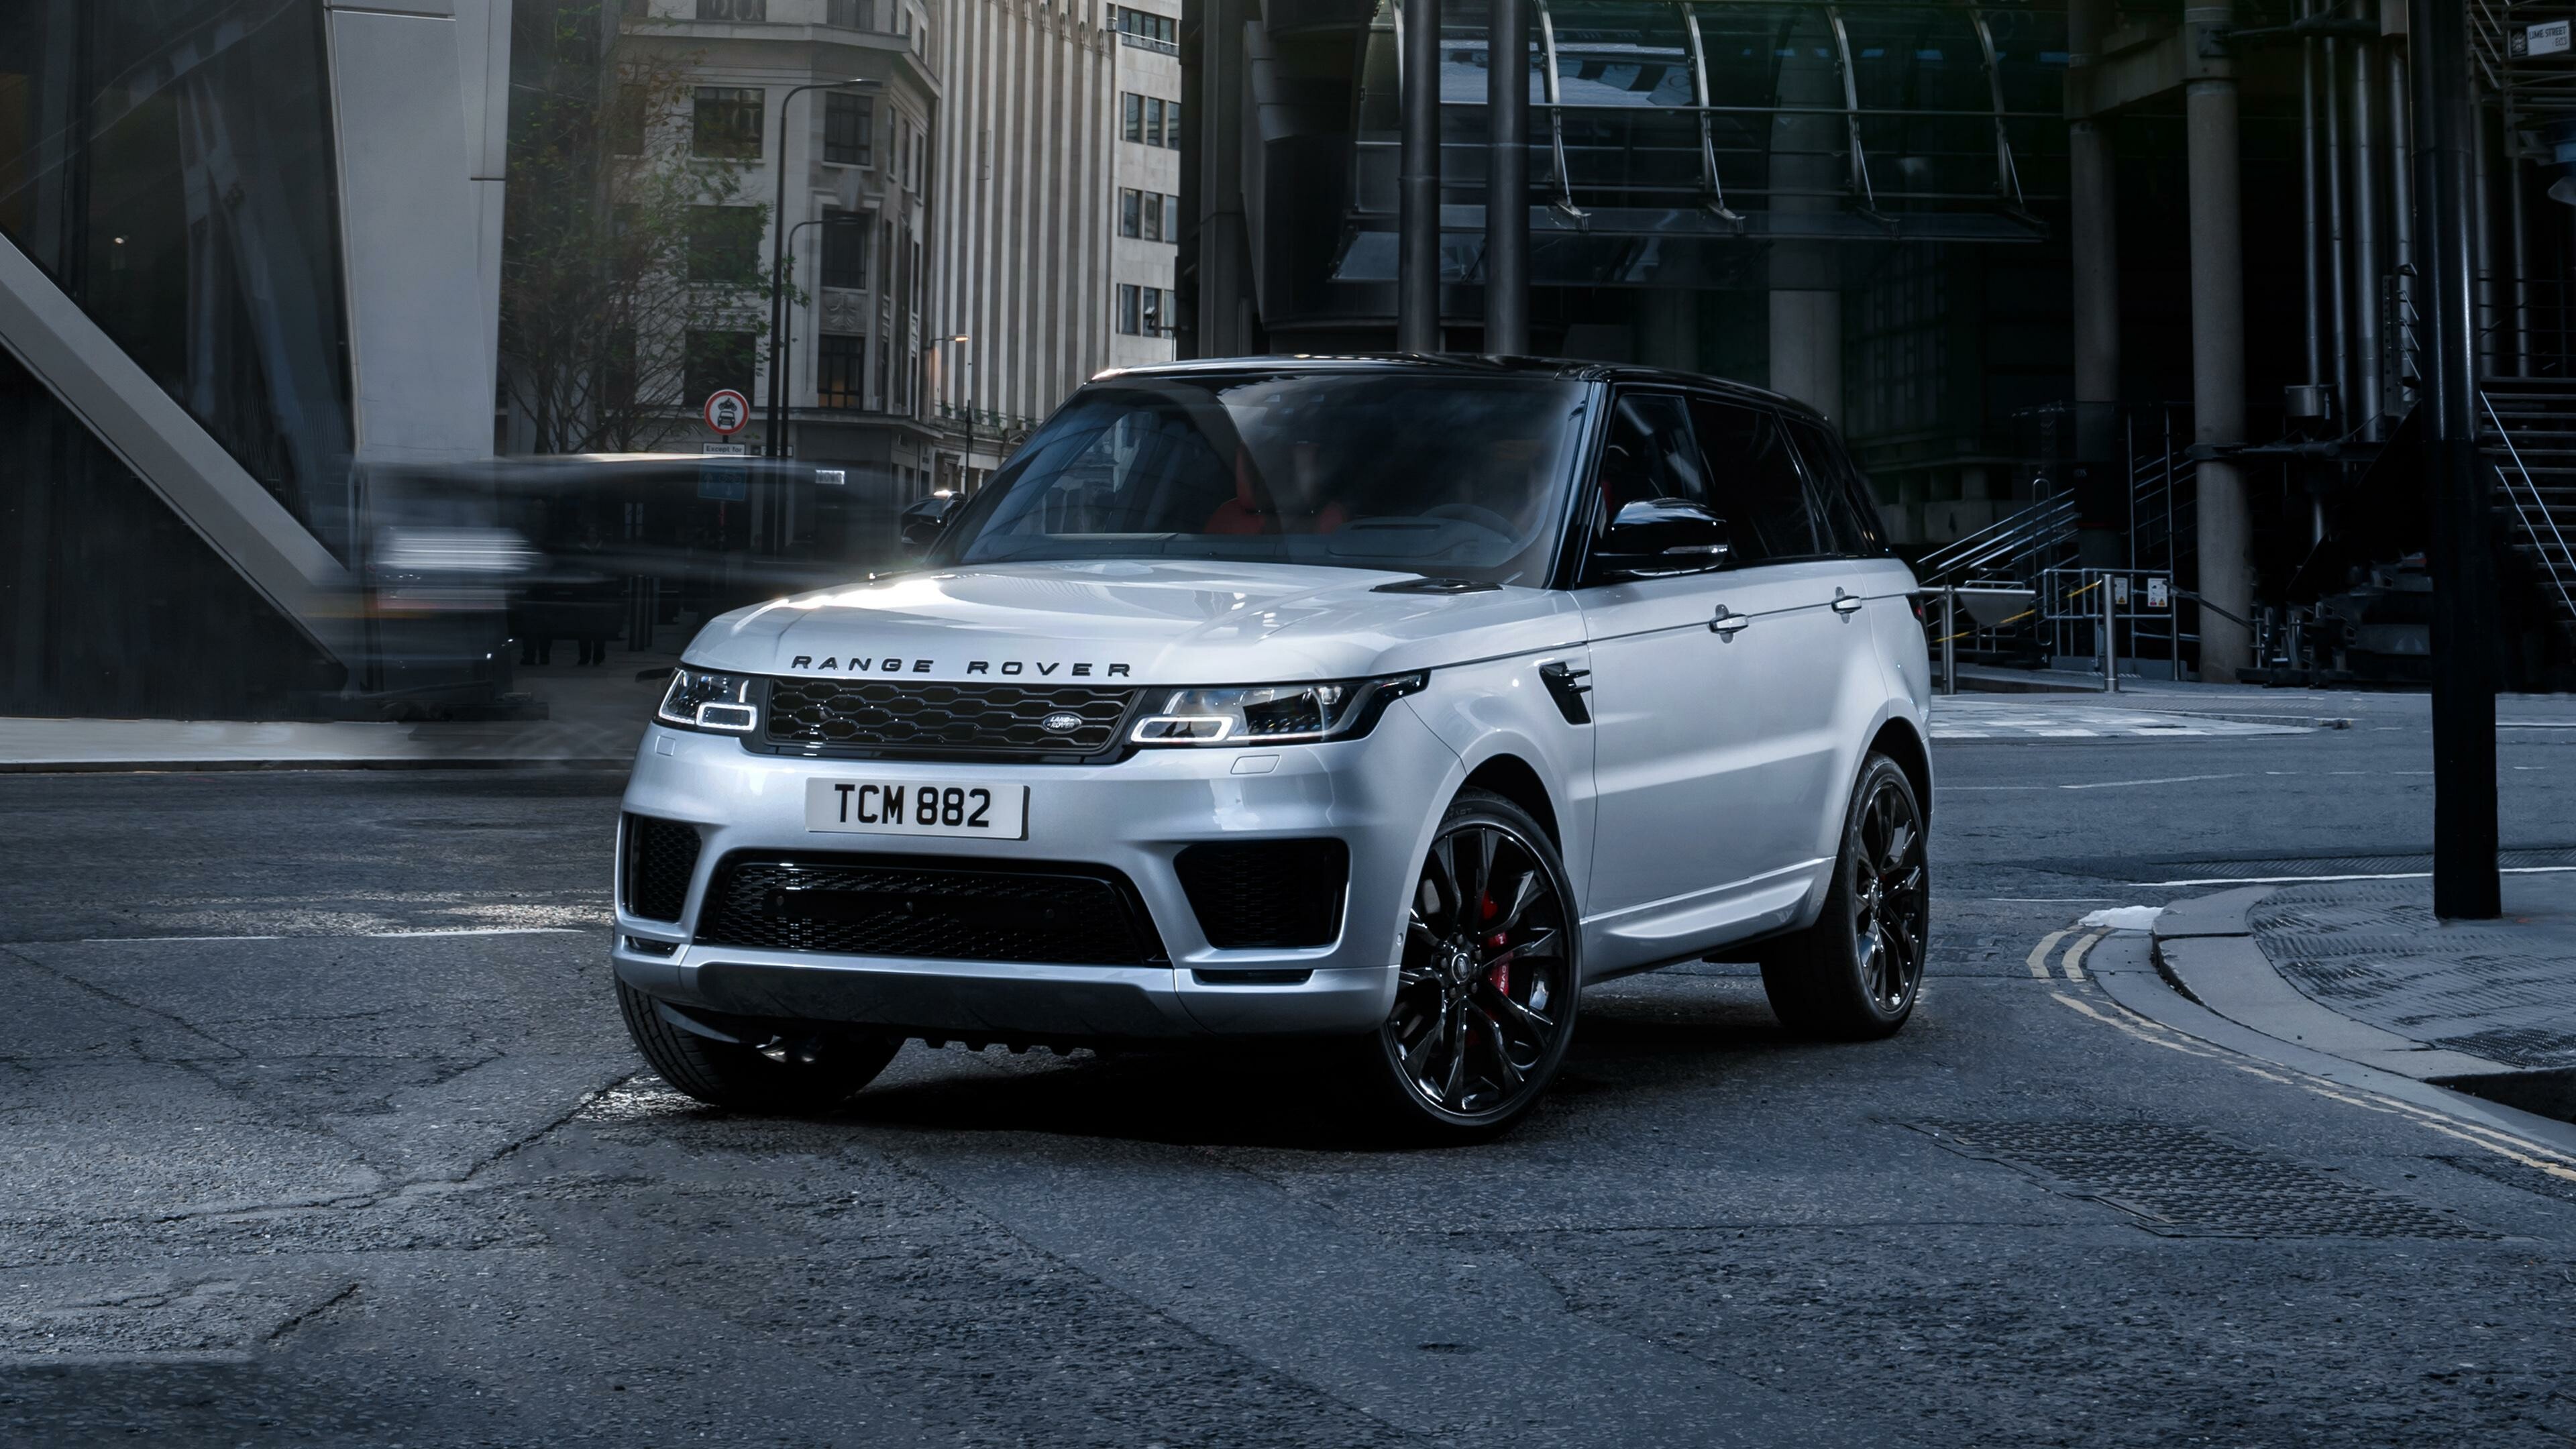 Range Rover: JLR sub-brand, now in its fifth generation. 3840x2160 4K Wallpaper.